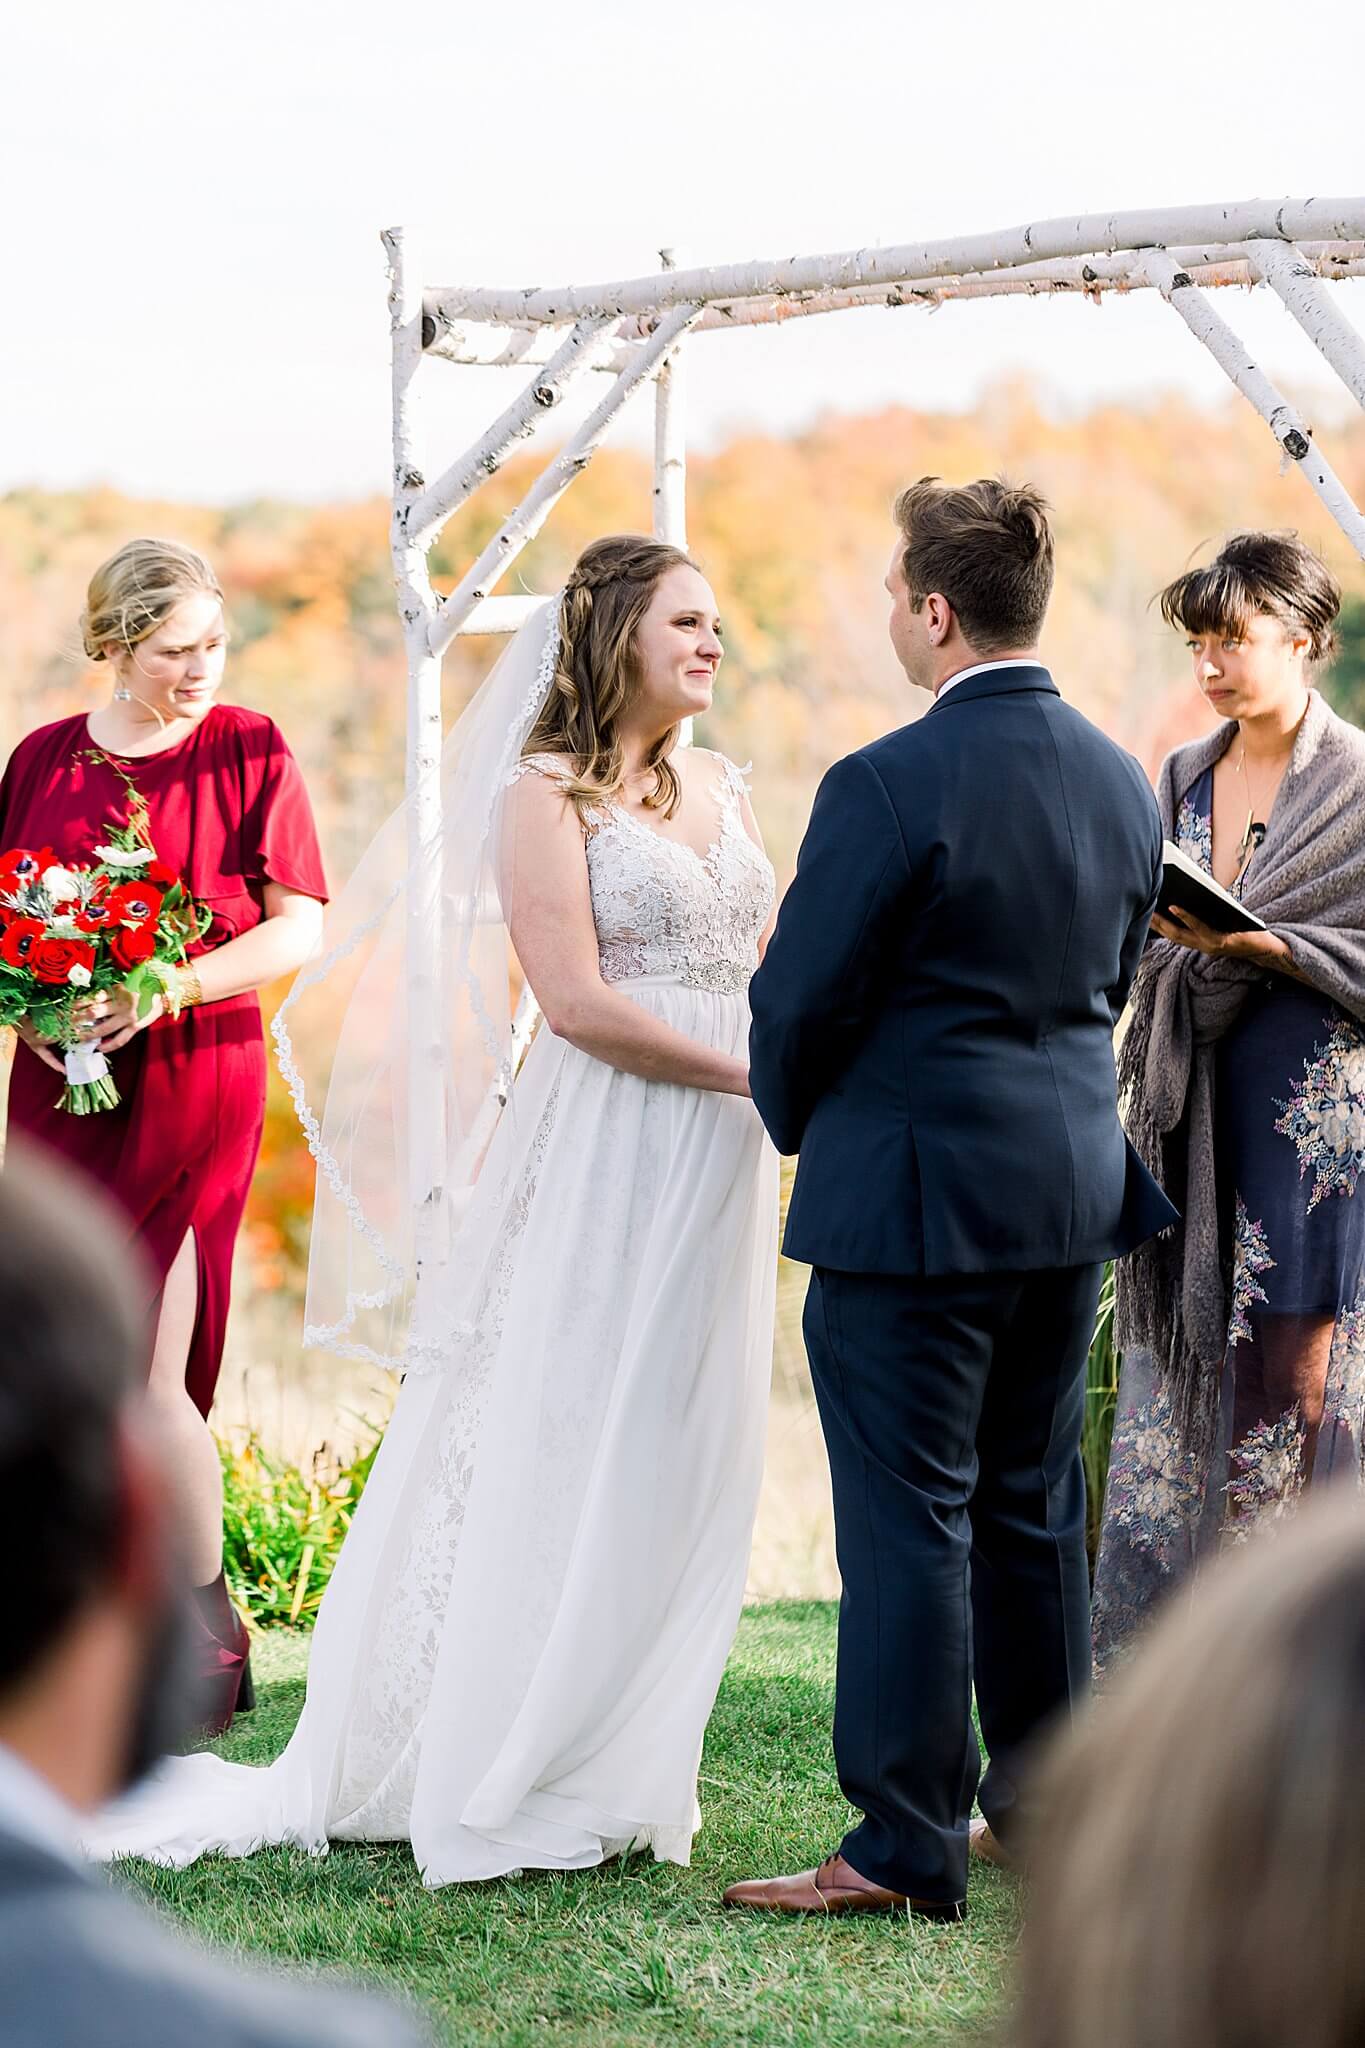 Bride smiles at groom during ceremony at Timberlee Hills Wedding in Traverse City, Northern Michigan.